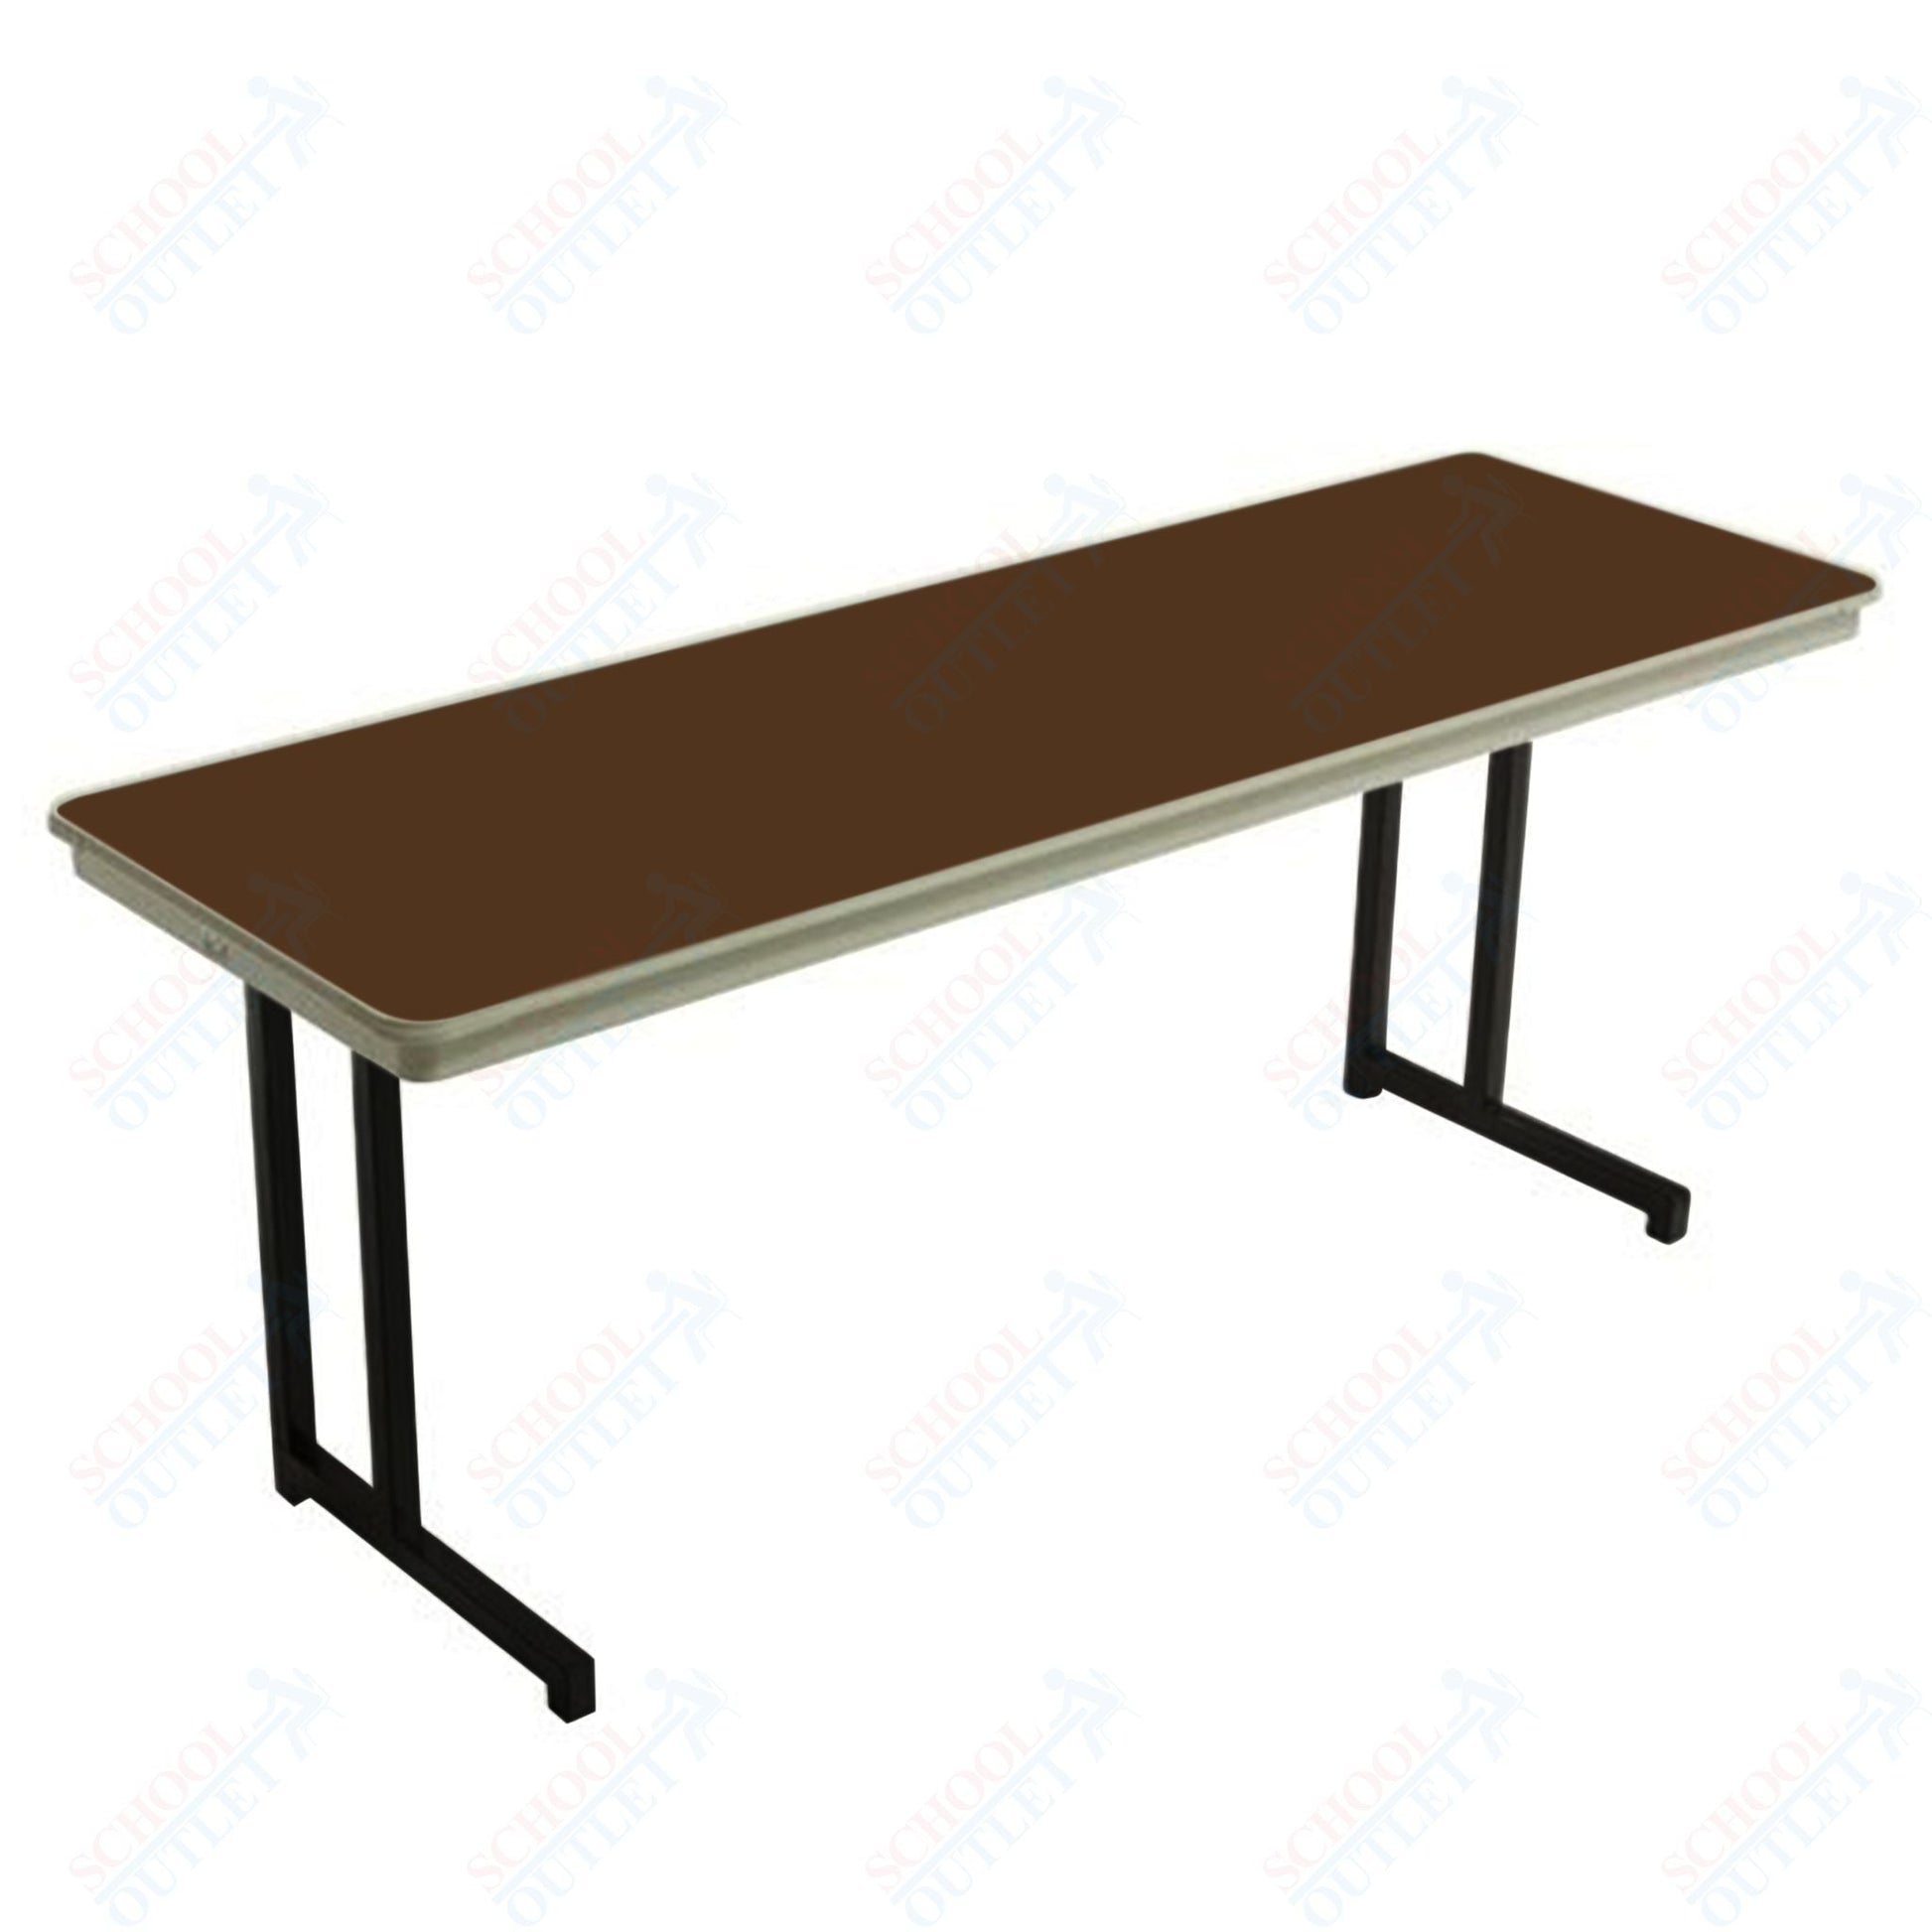 AmTab Dynalite Featherweight Heavy - Duty ABS Plastic Training Table - Rectangle - 18"W x 72"L x 29"H (AmTab AMT - TT186DL) - SchoolOutlet